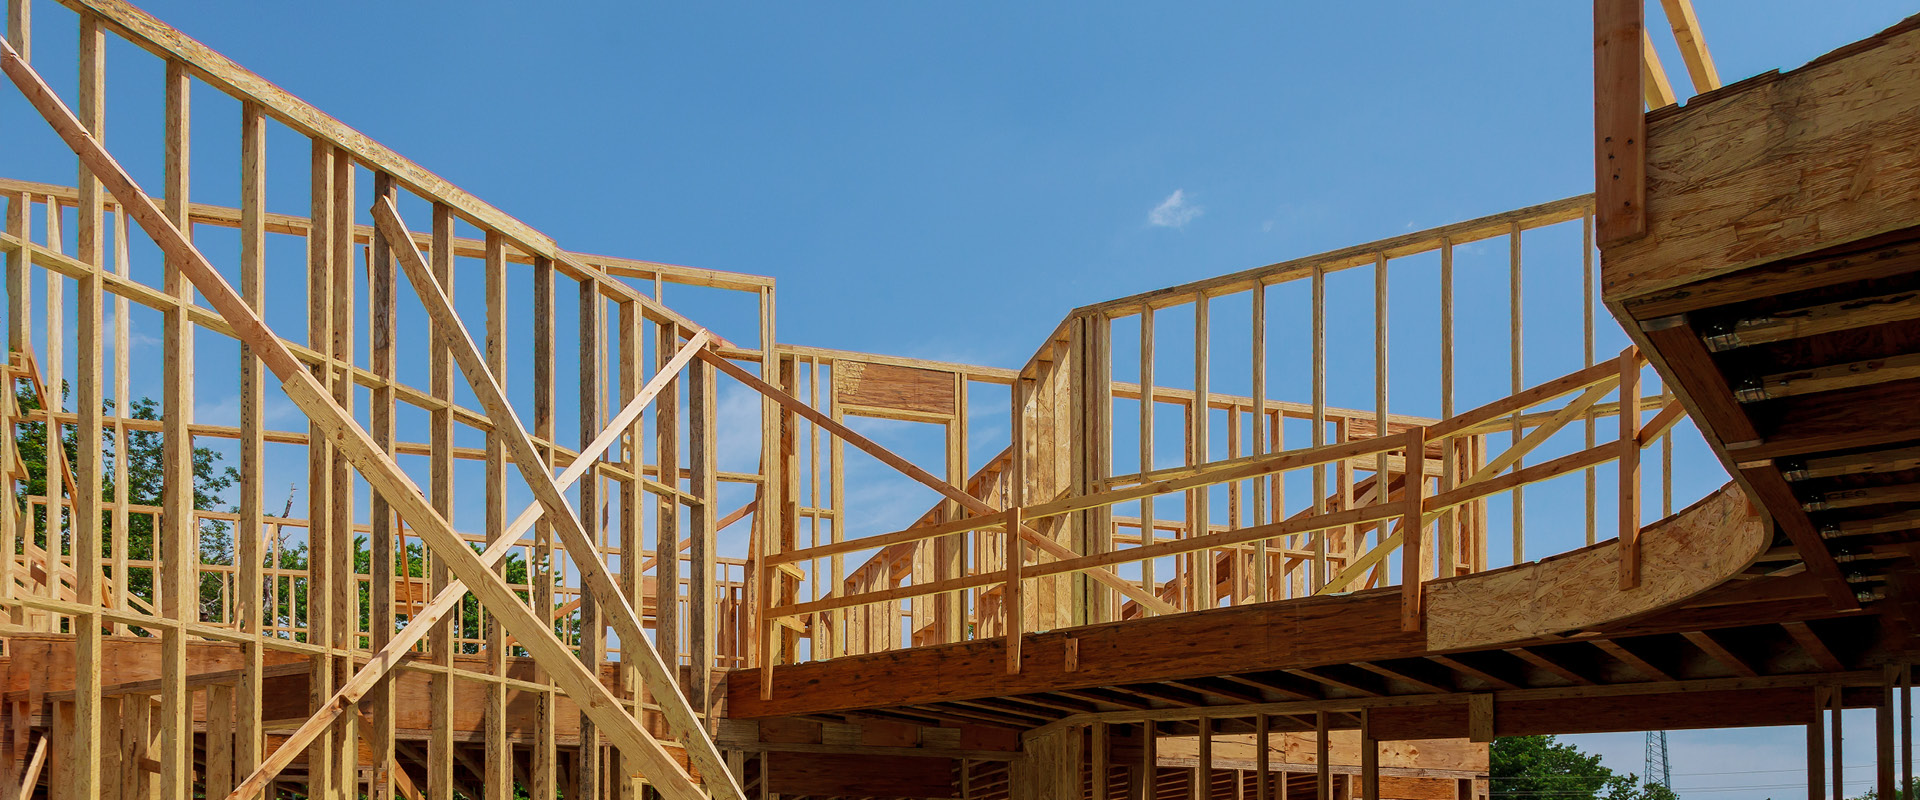 Why use timber frame structures rather than building blocks?